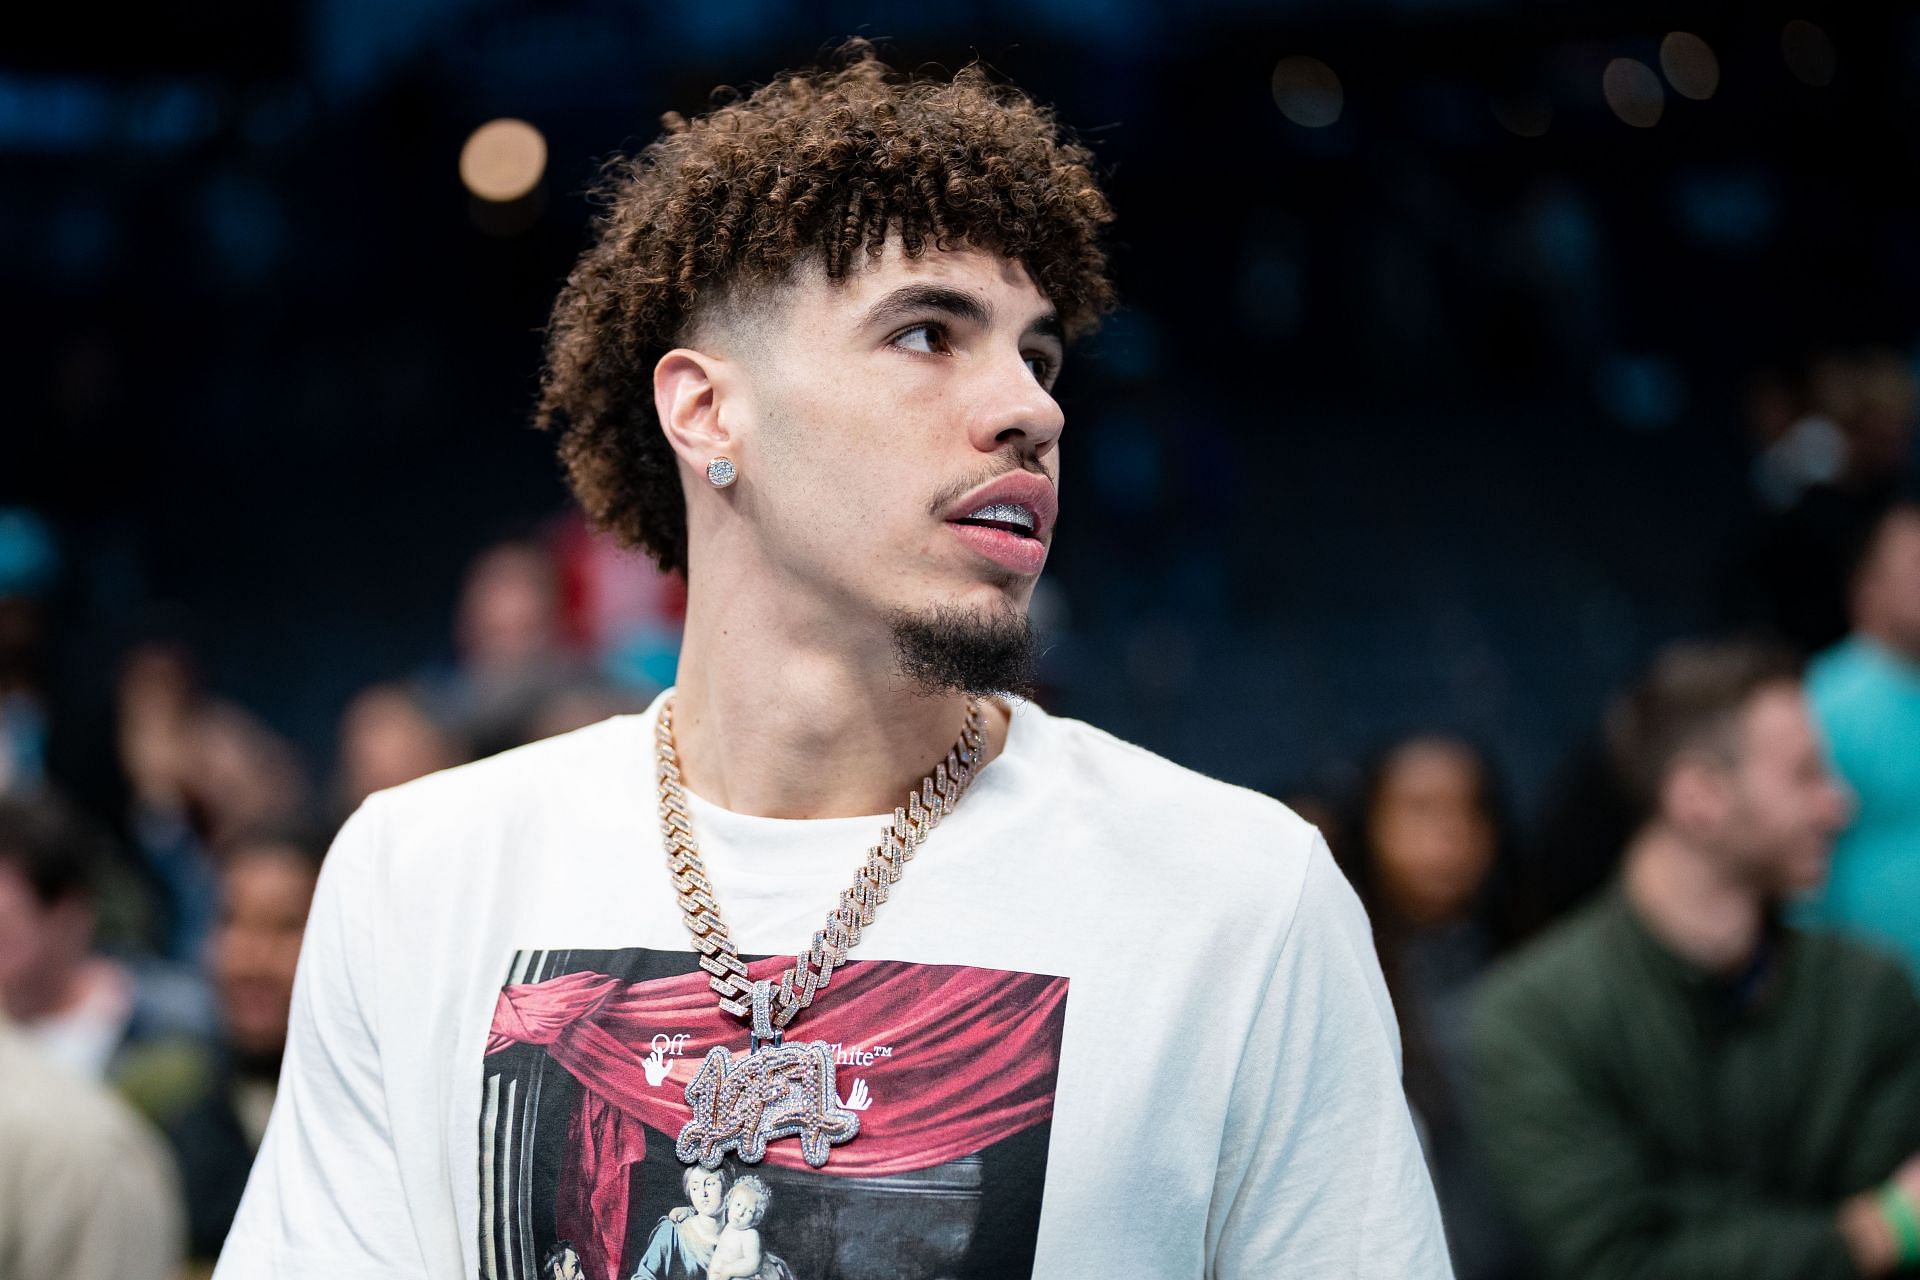 LaMelo Ball of the Charlotte Hornets